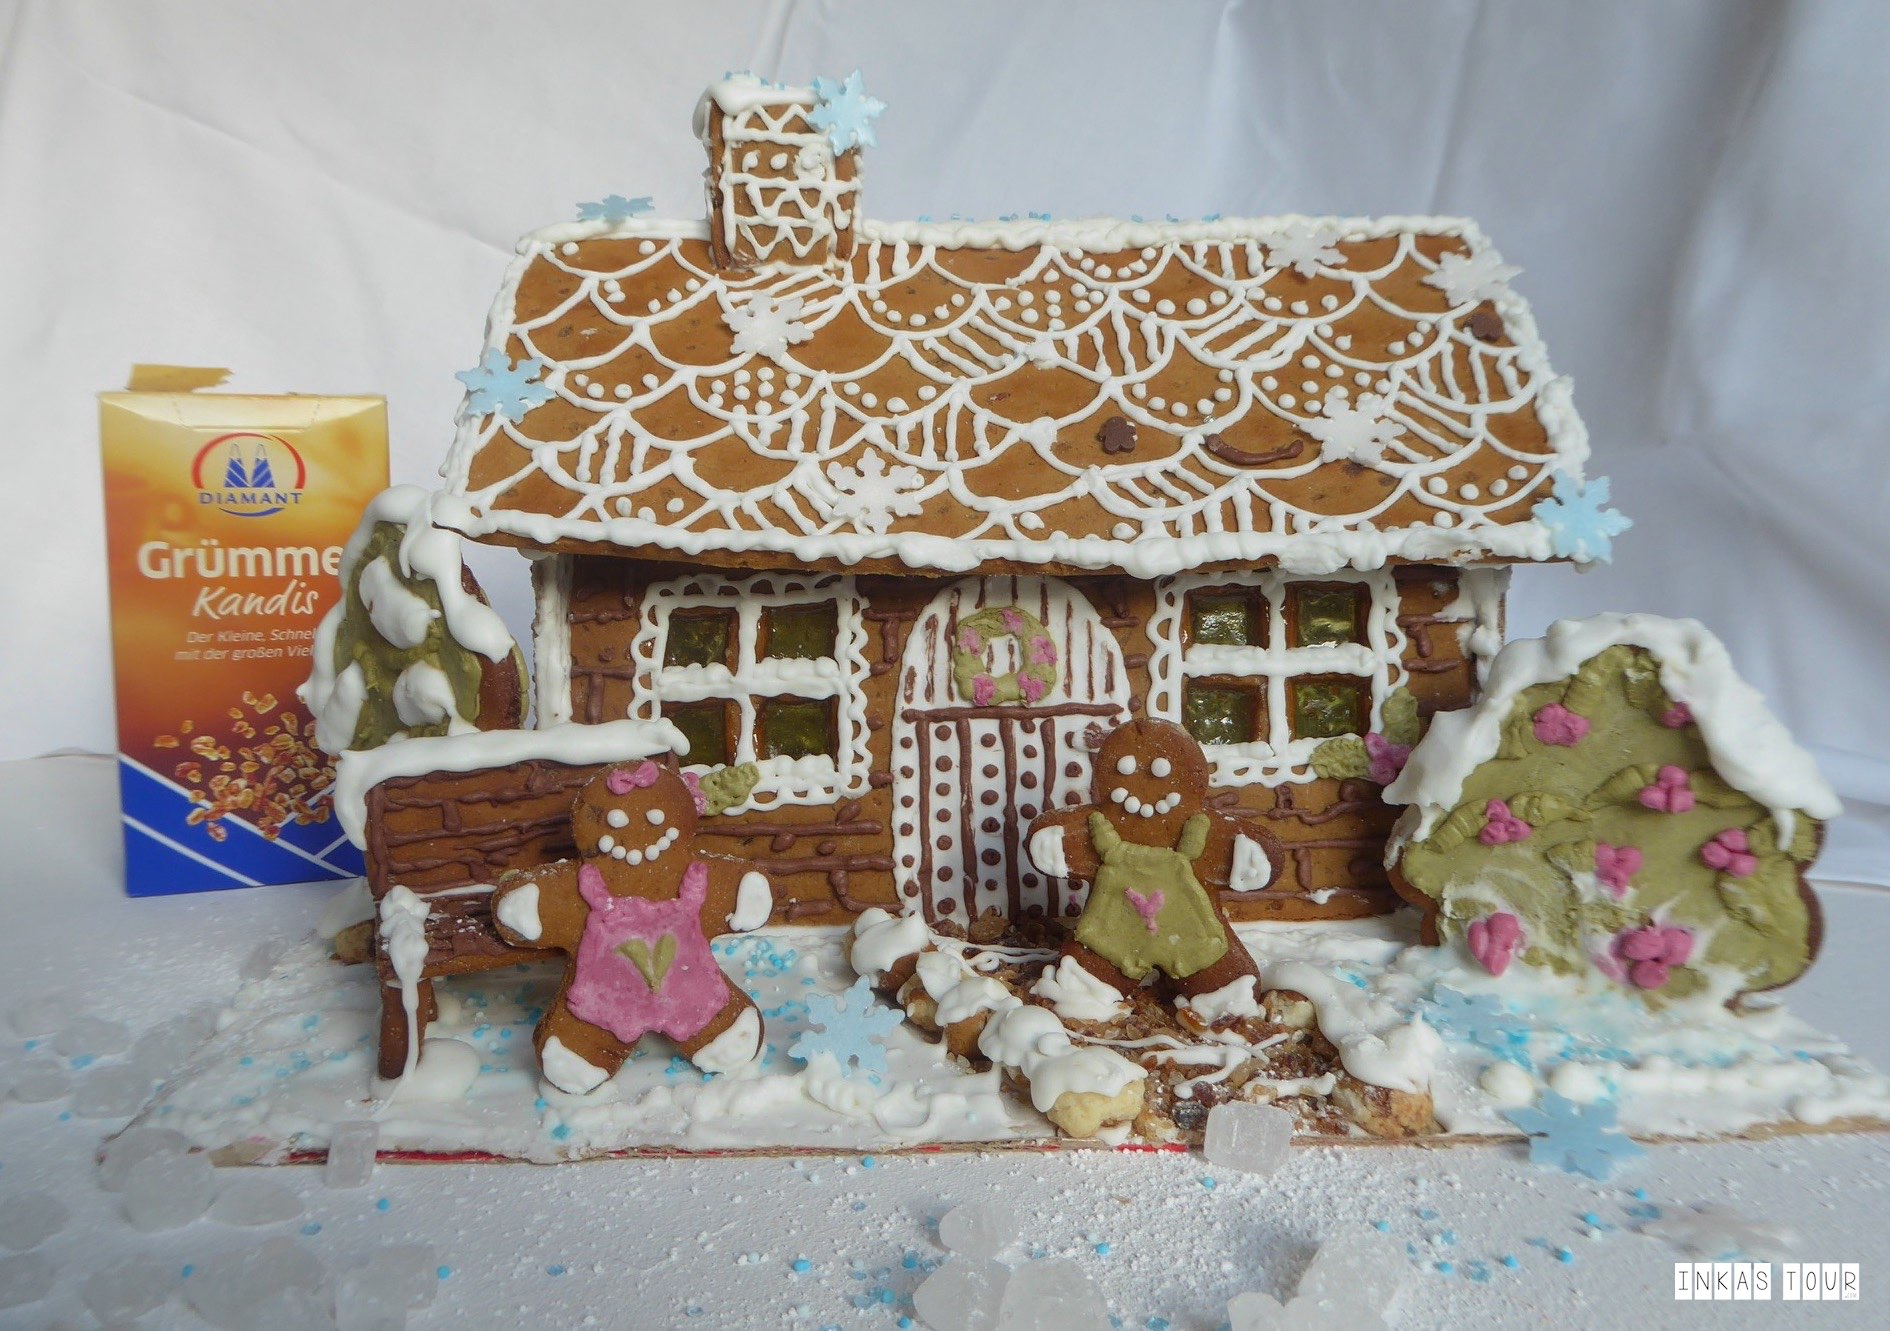 Gingerbread House Lebkuchen Haus Decorate and Bake Recipe Rezept Christmas Advents Calender Customs and Traditions Inkas Tour Travelblog Baking Blog Food around the World Baking a Gingerbread House